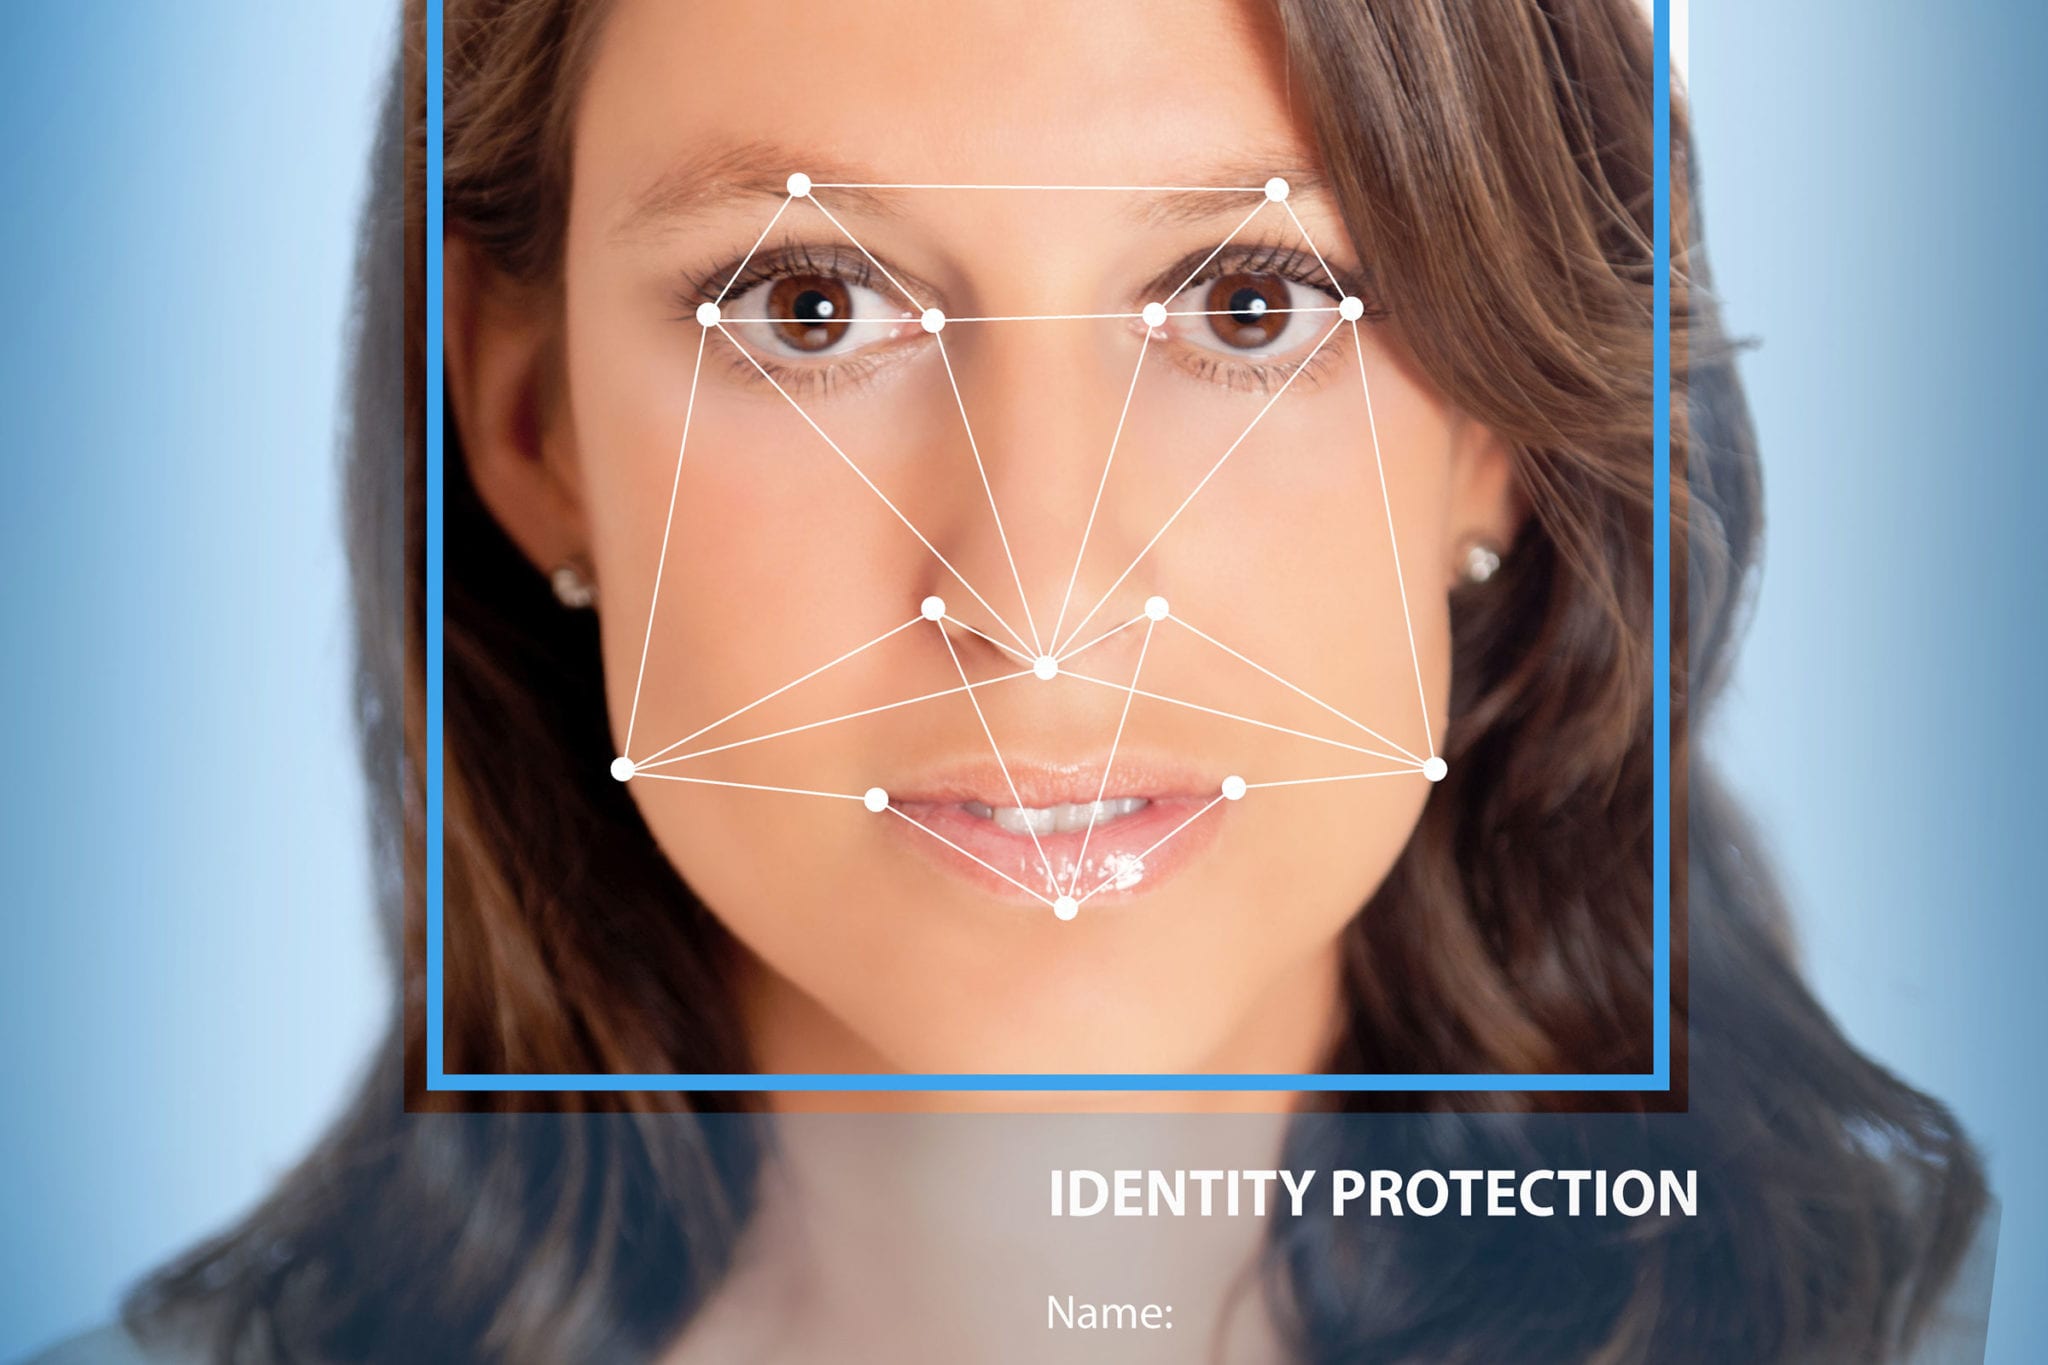 Global Security Revolutionized by Facial Recognition